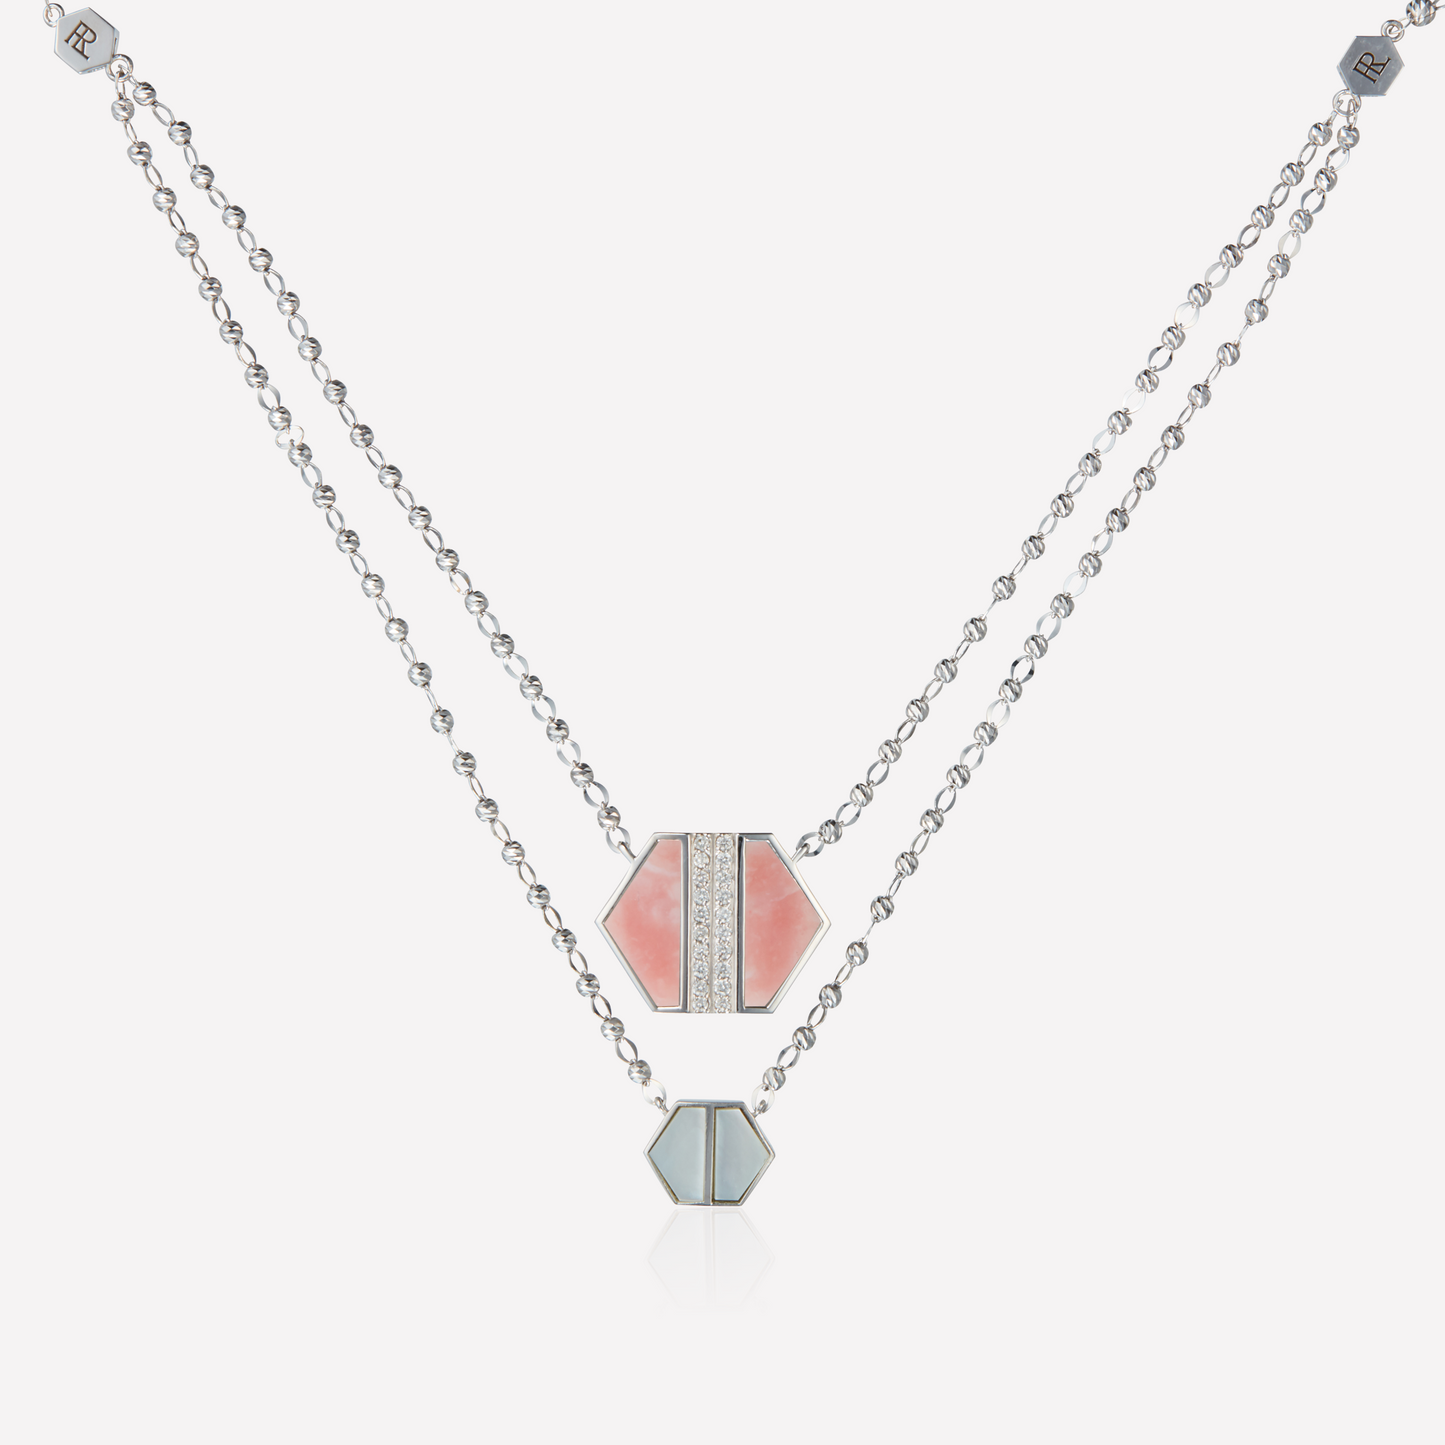 VOID Filled By You Necklace, Large, Pink Opal, Diamond L